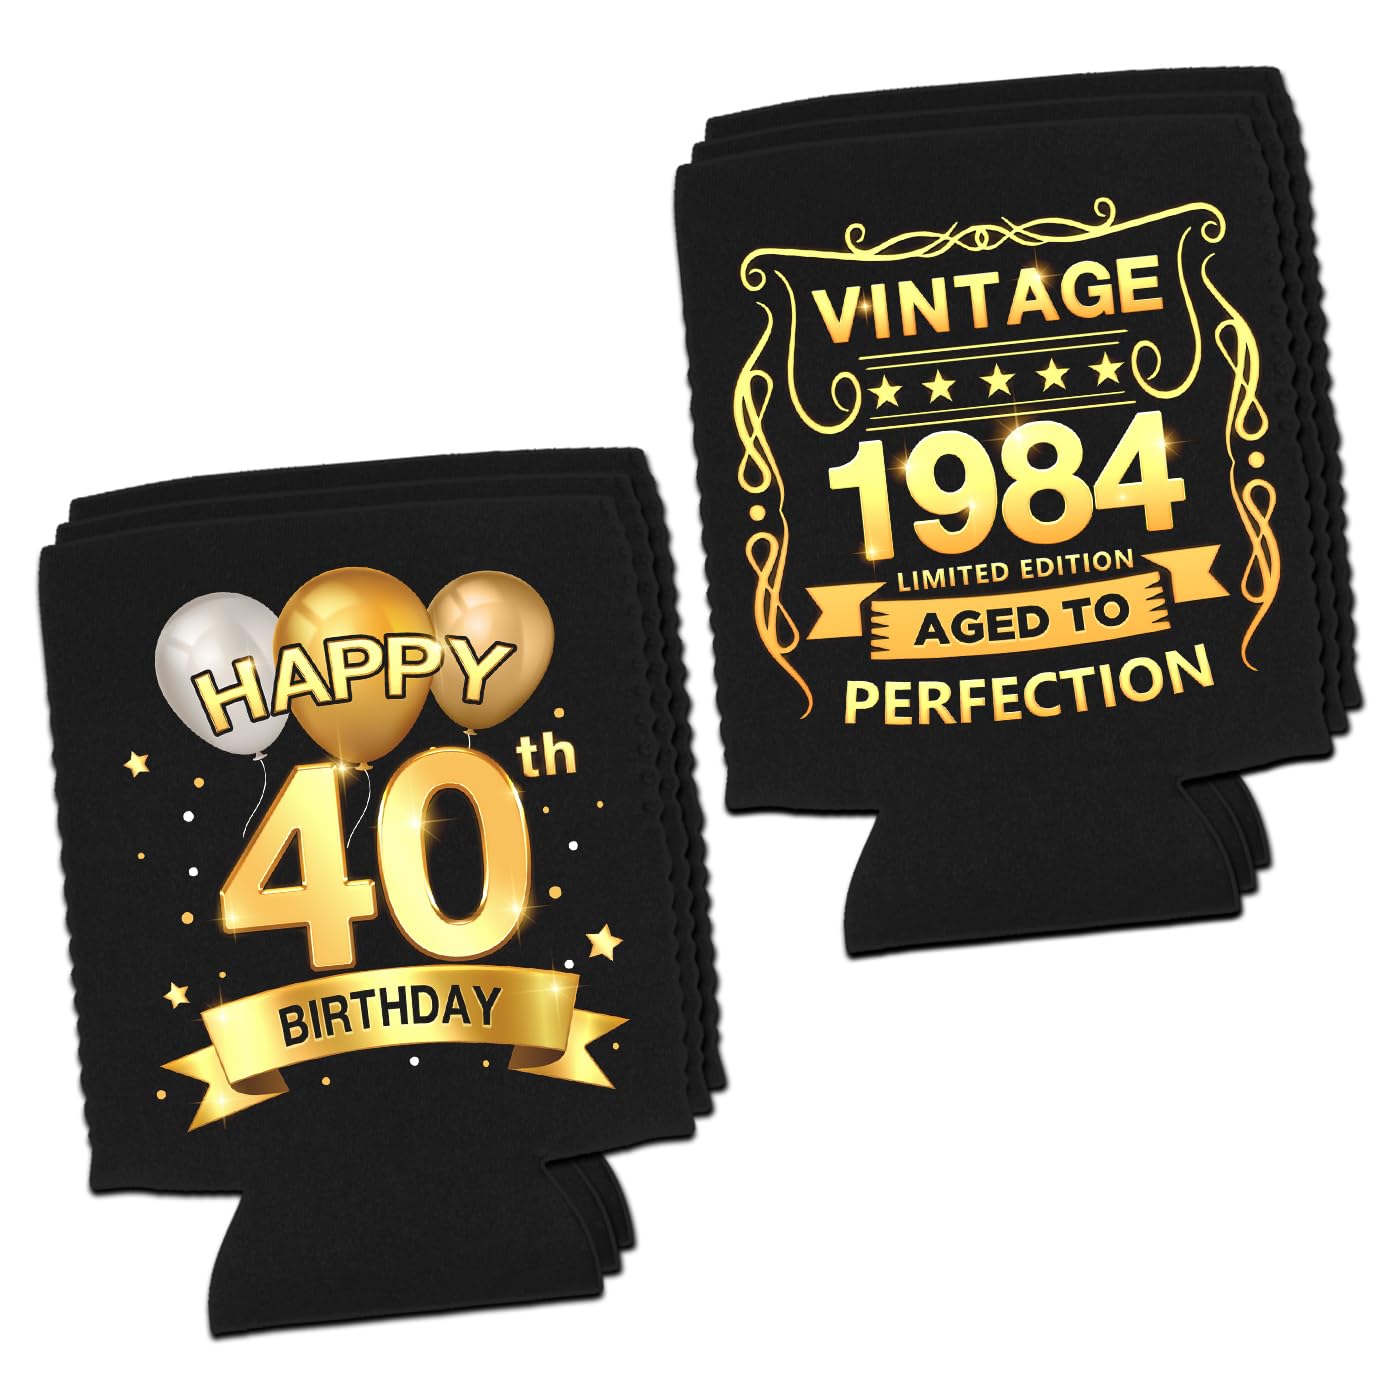 Greatingreat 40th Birthday Can Cooler Sleeves Pack of 12-40th Anniversary Decorations- Vintage 1984-40th Birthday Party Supplies - Black and Gold Fortieth Birthday Cup Coolers